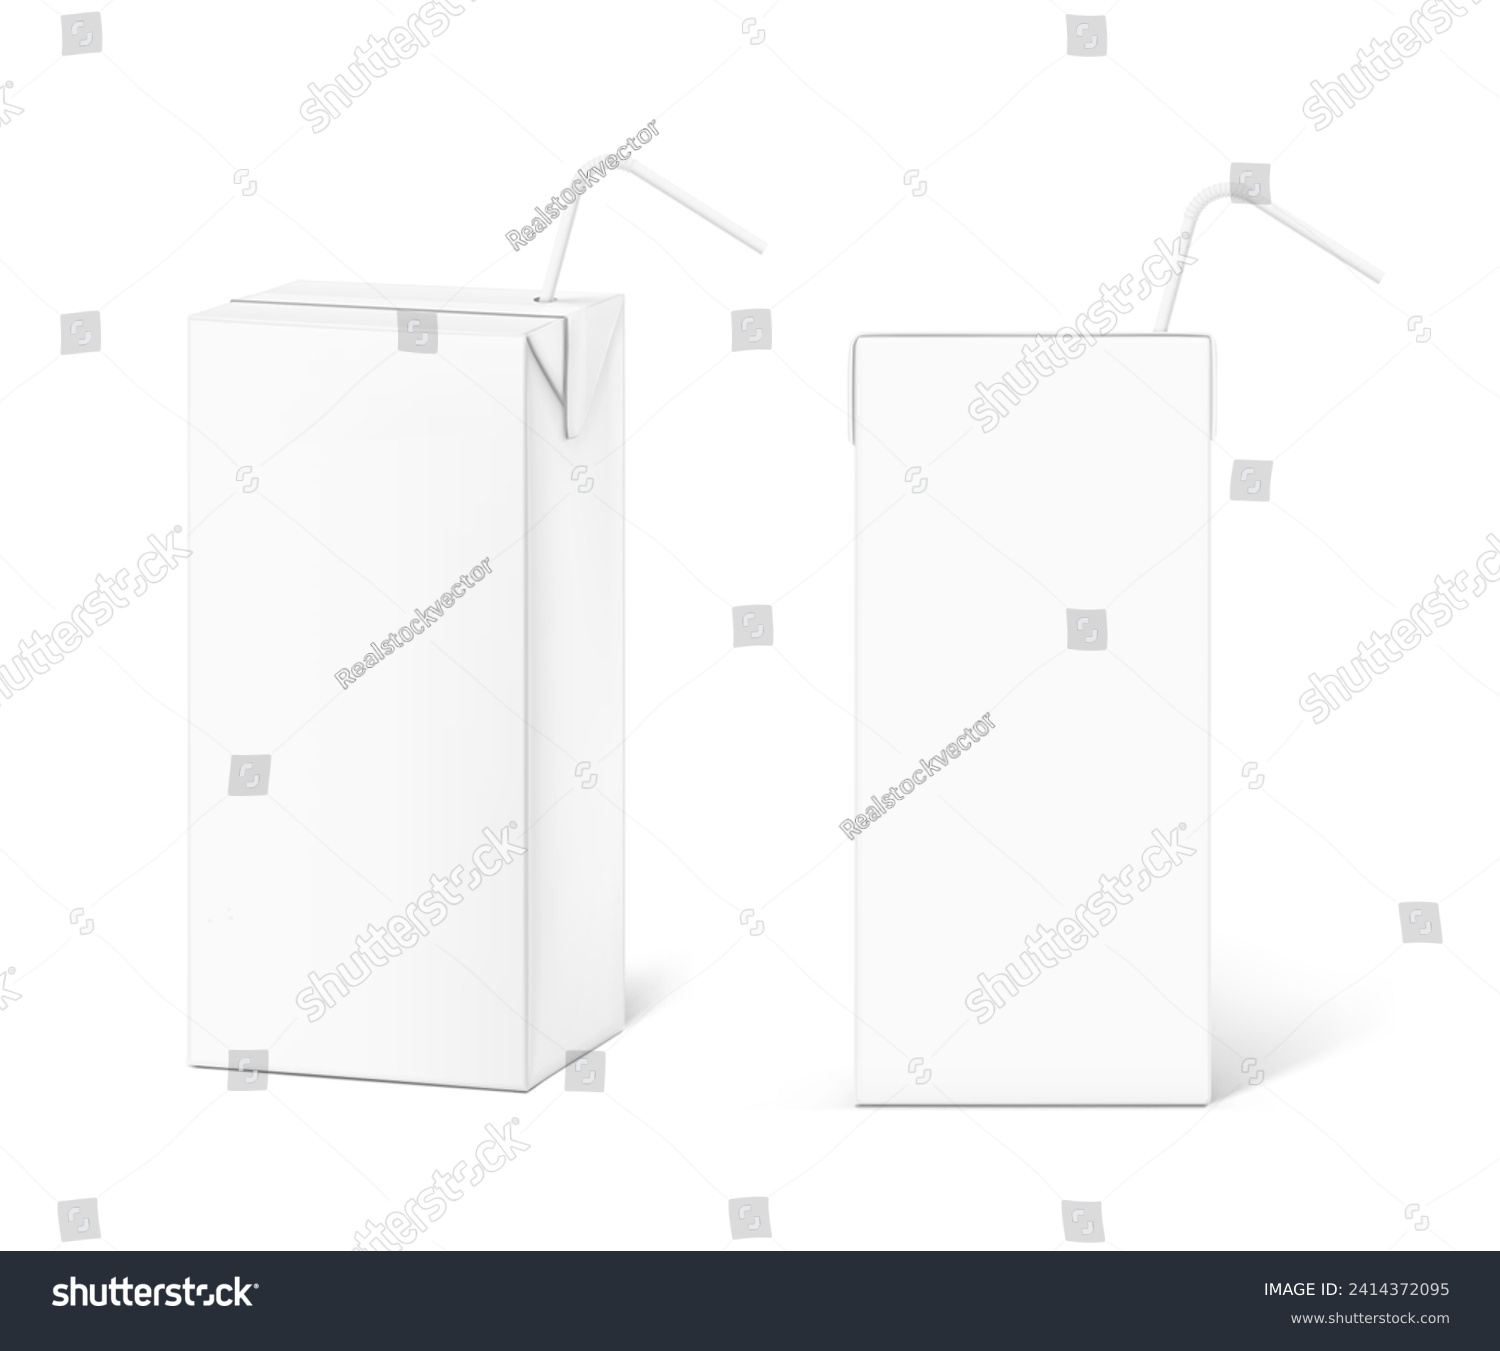 SVG of High realistic packaging box with straw mockup. Vector illustration isolated on white background, ready and simple to use for your design. EPS10. svg